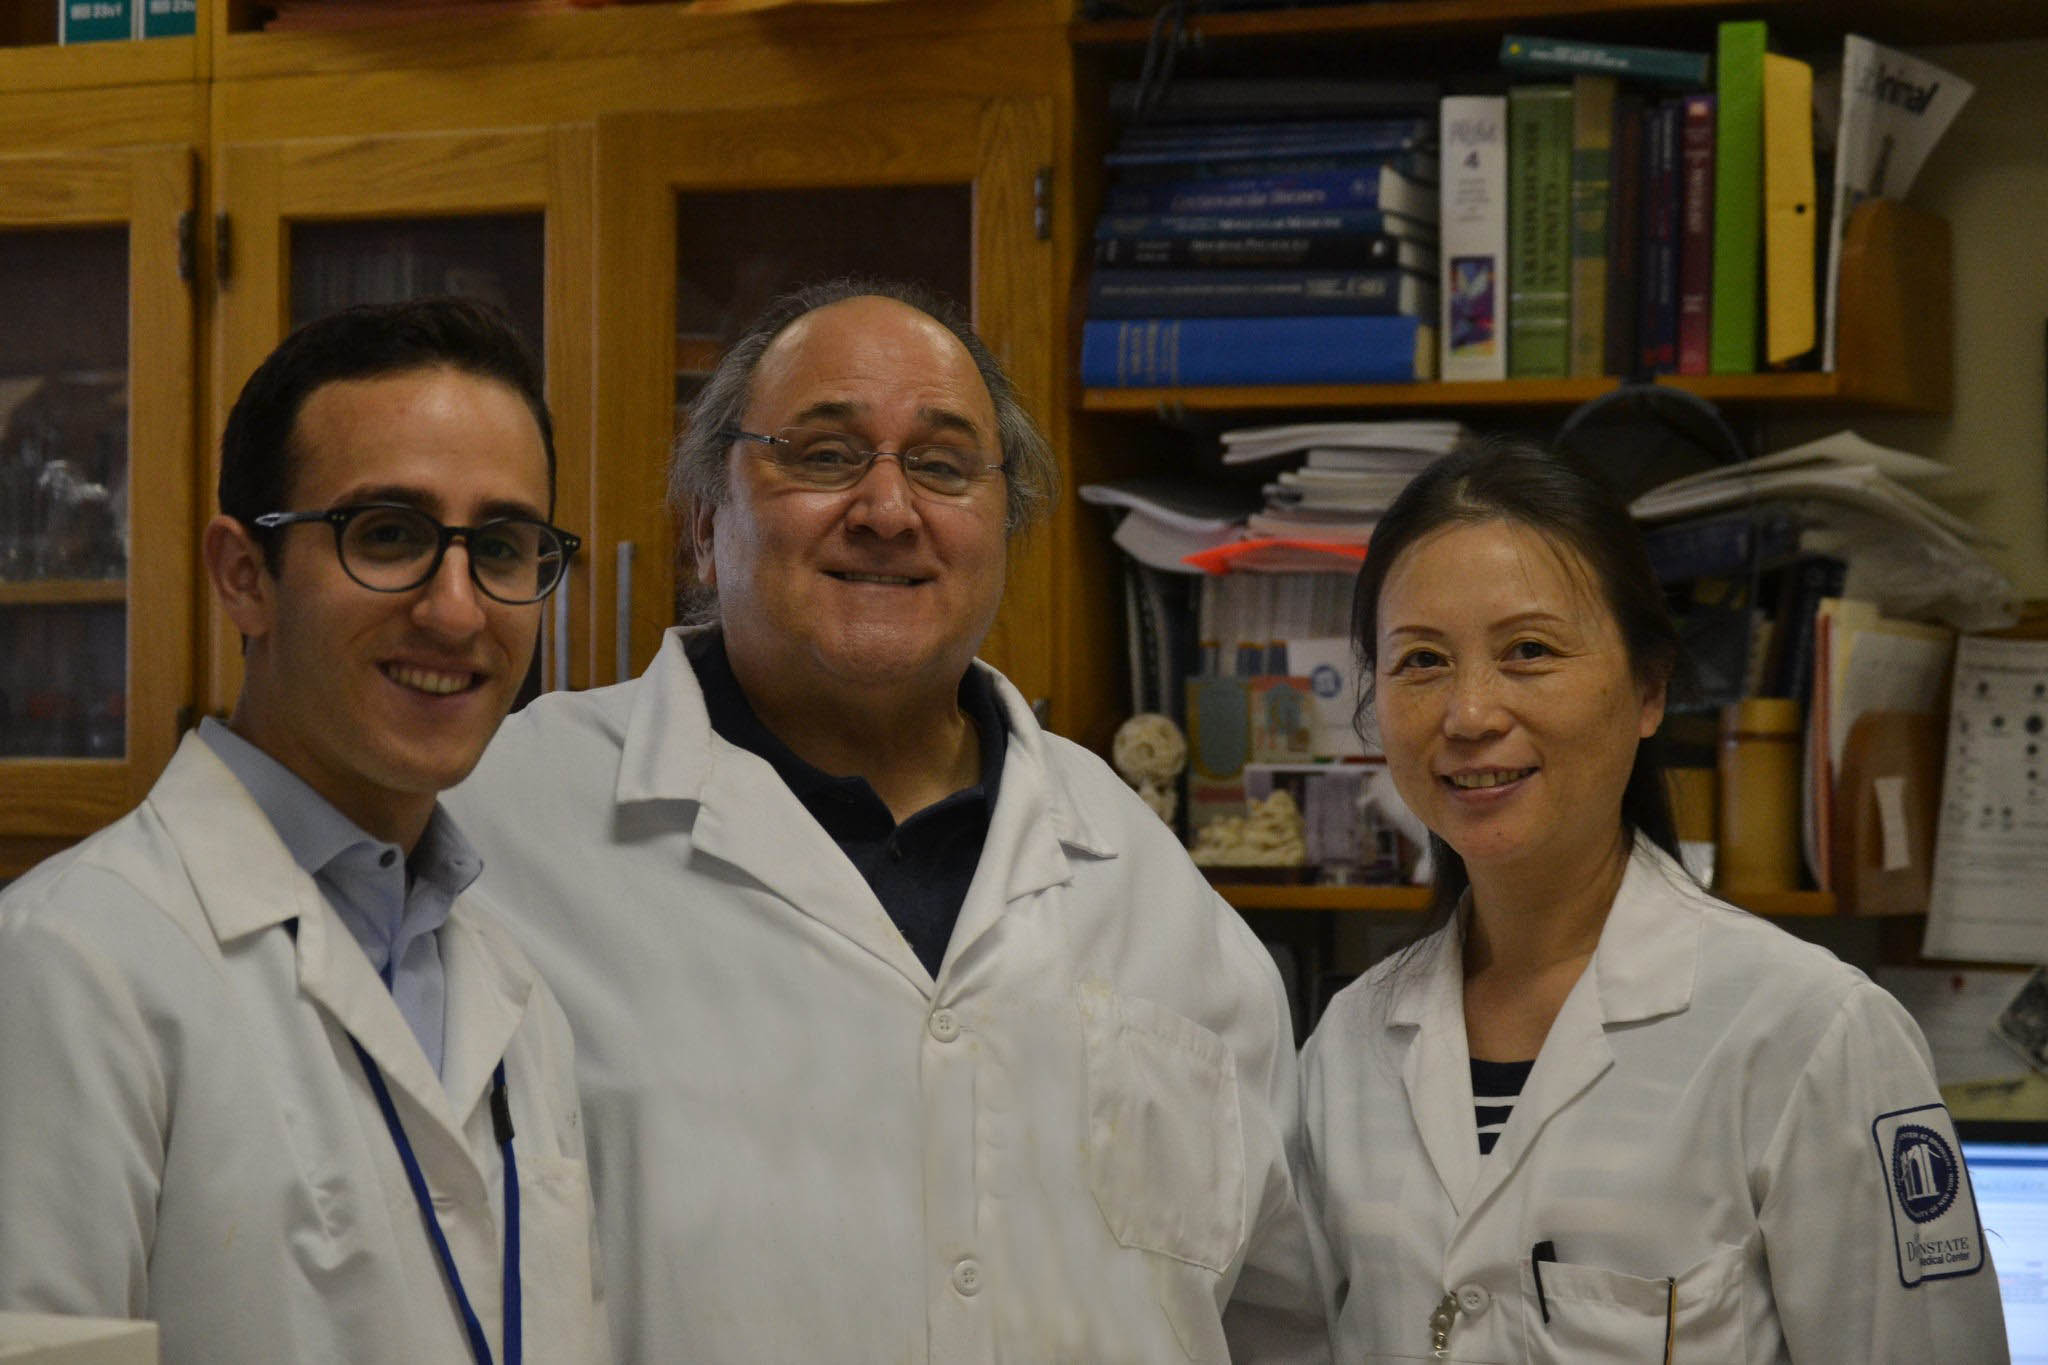 Moshe Bedziner (left) with Dr. Frank Barone (center) and Dr. Jie Li (right) at the SUNY Downstate Medical Center Cerebrovascular Research Laboratory